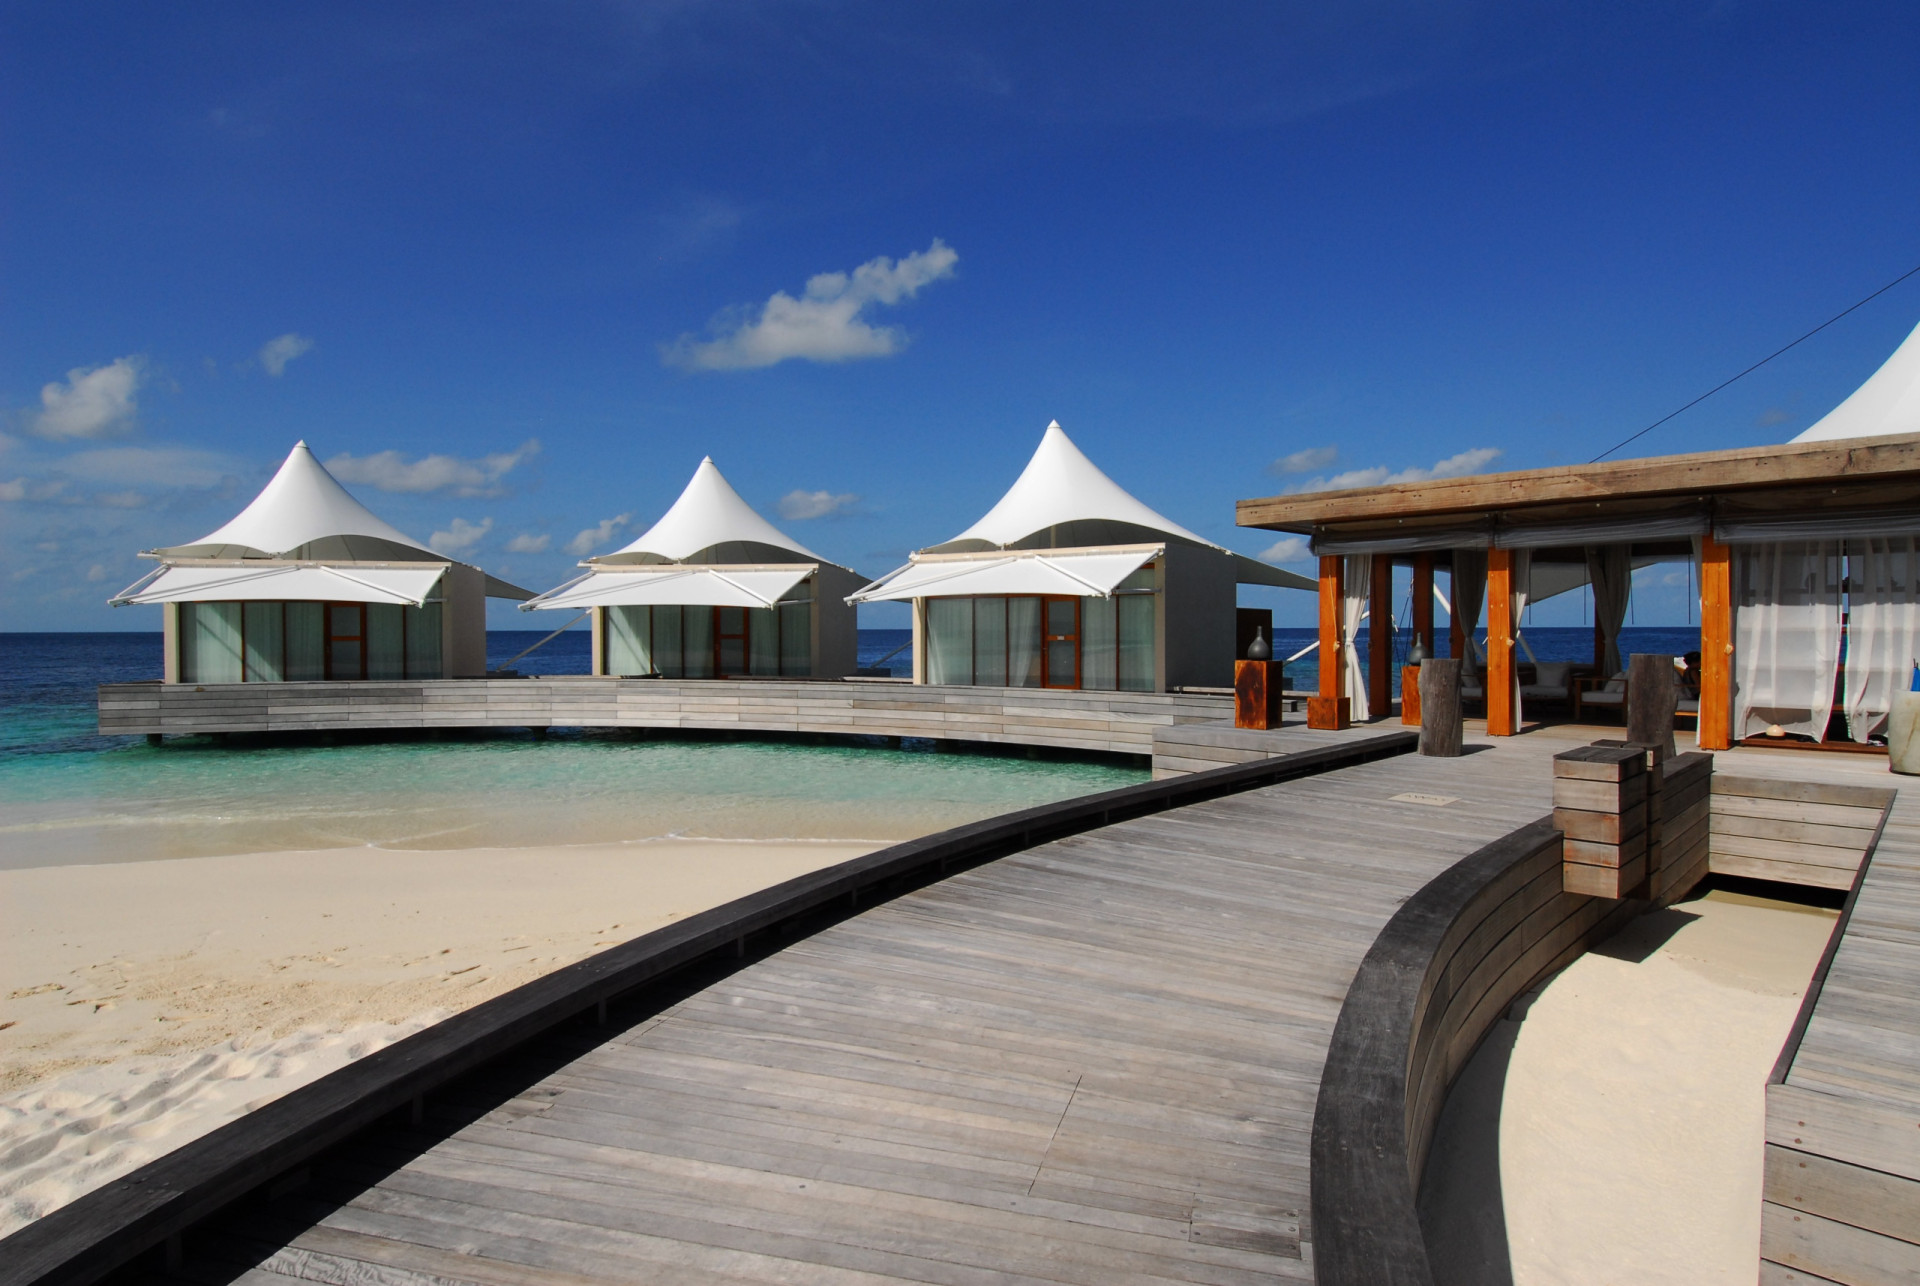 <p>For US$6.8 million, guests can turn the W Maldives resort into their own private sanctuary, with exclusive use of all 78 overwater and beach suites, gourmet dining venues, and an underground nightclub. Not bad, huh?</p>